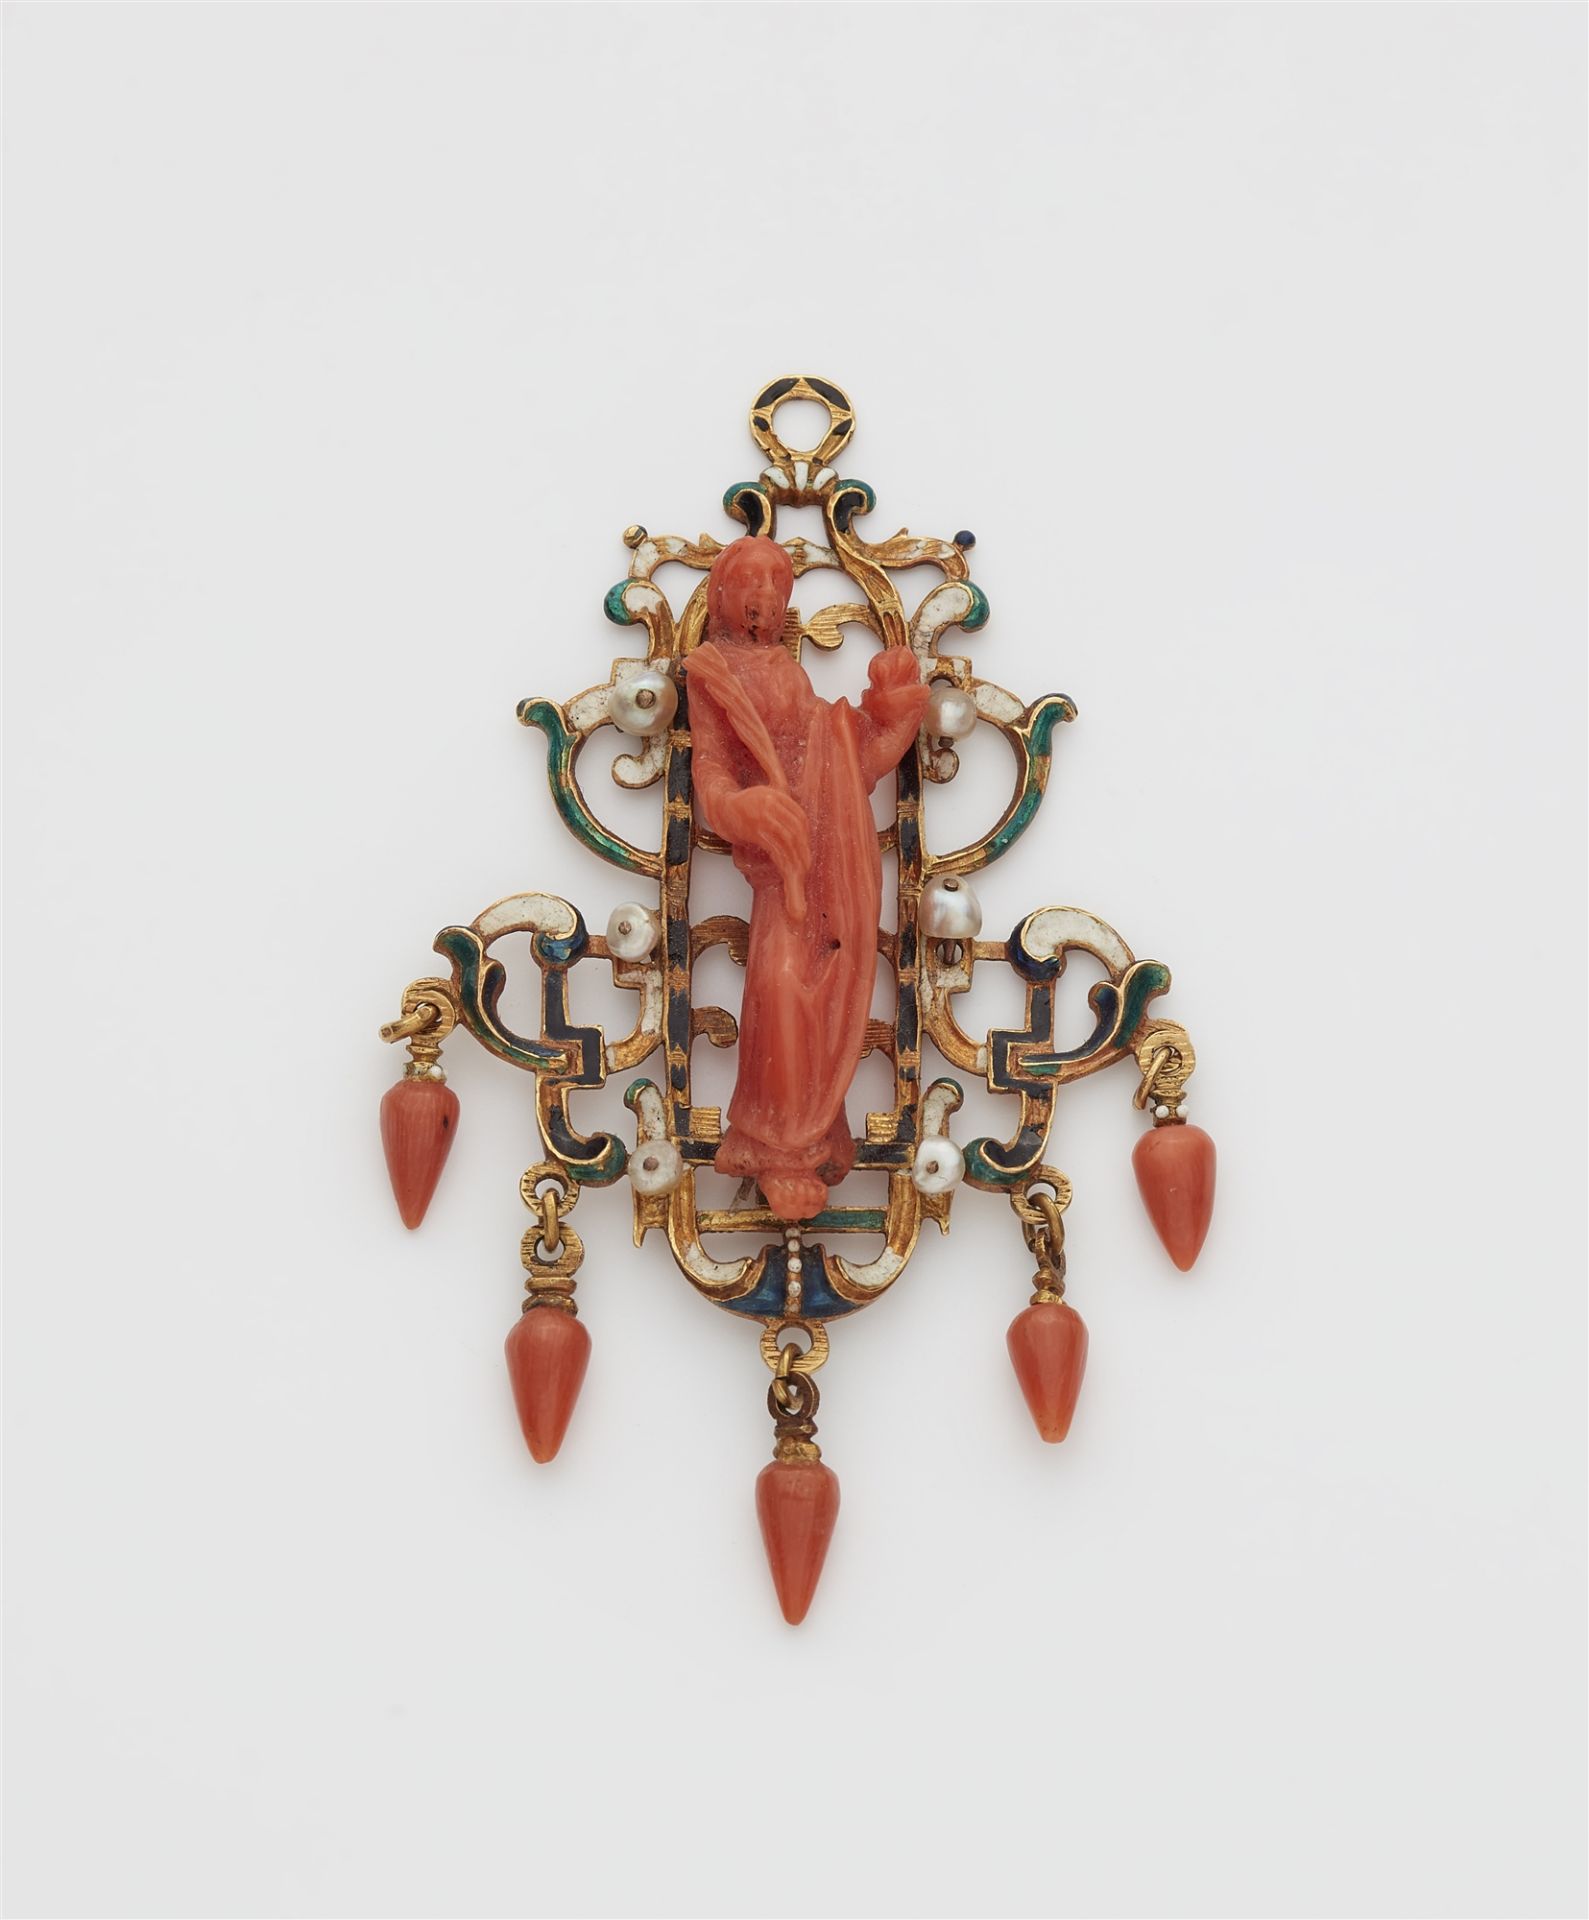 A Sicilian gold, enamel, pearl and carved coral devotional pendant.